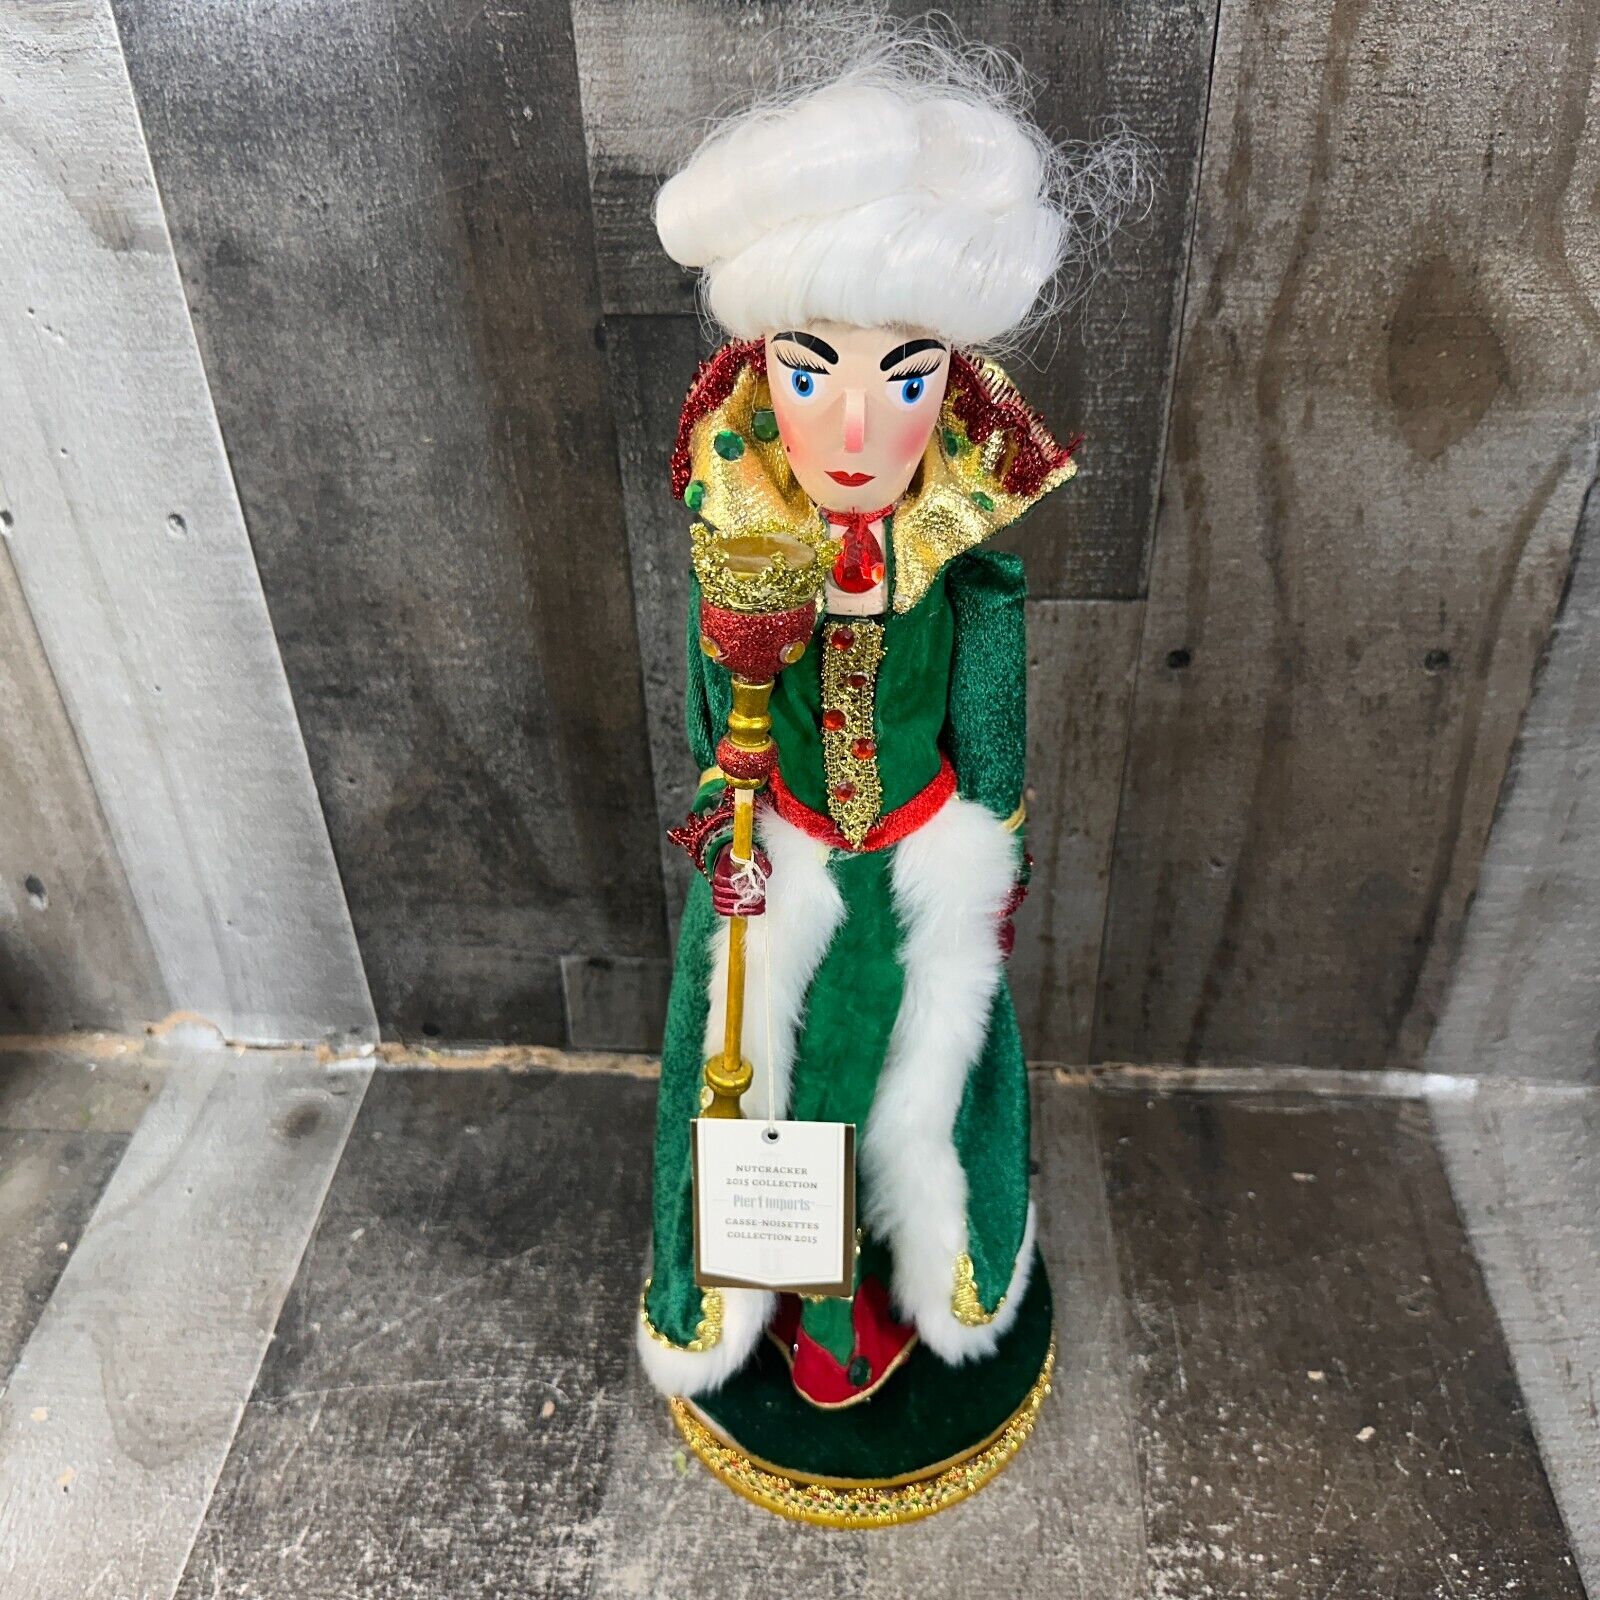 Pier 1 Imports Nutcracker  2015 Collection Queen, missing crown?